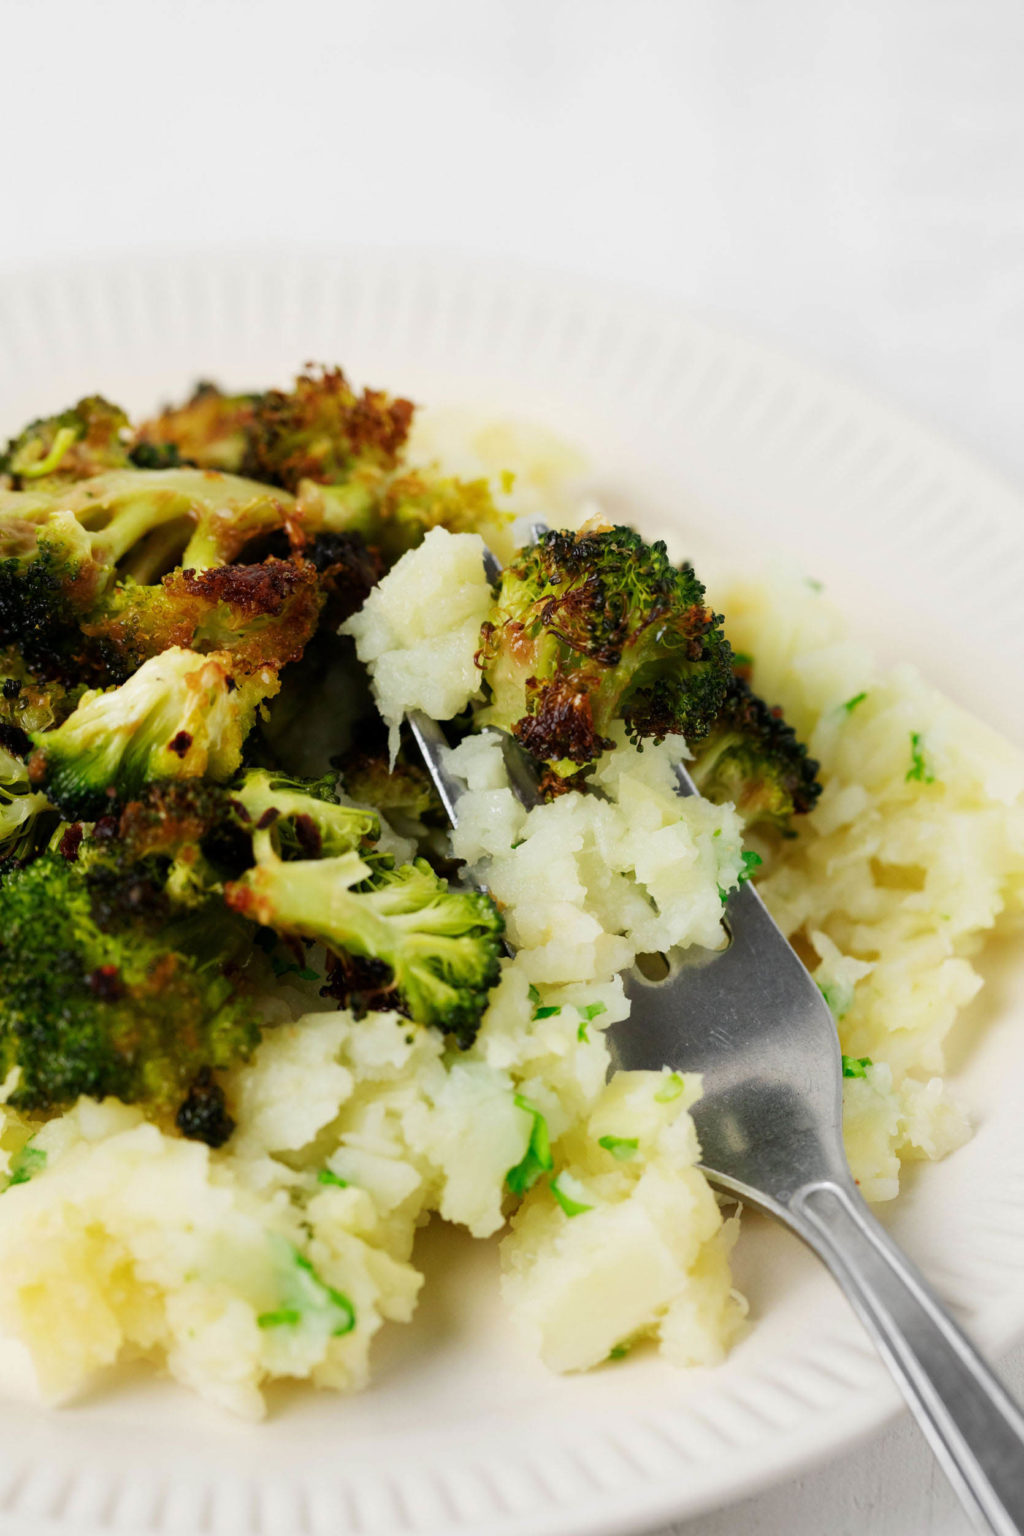 A zoomed in photo of roasted and browning broccoli, served with vegetables and herbs.